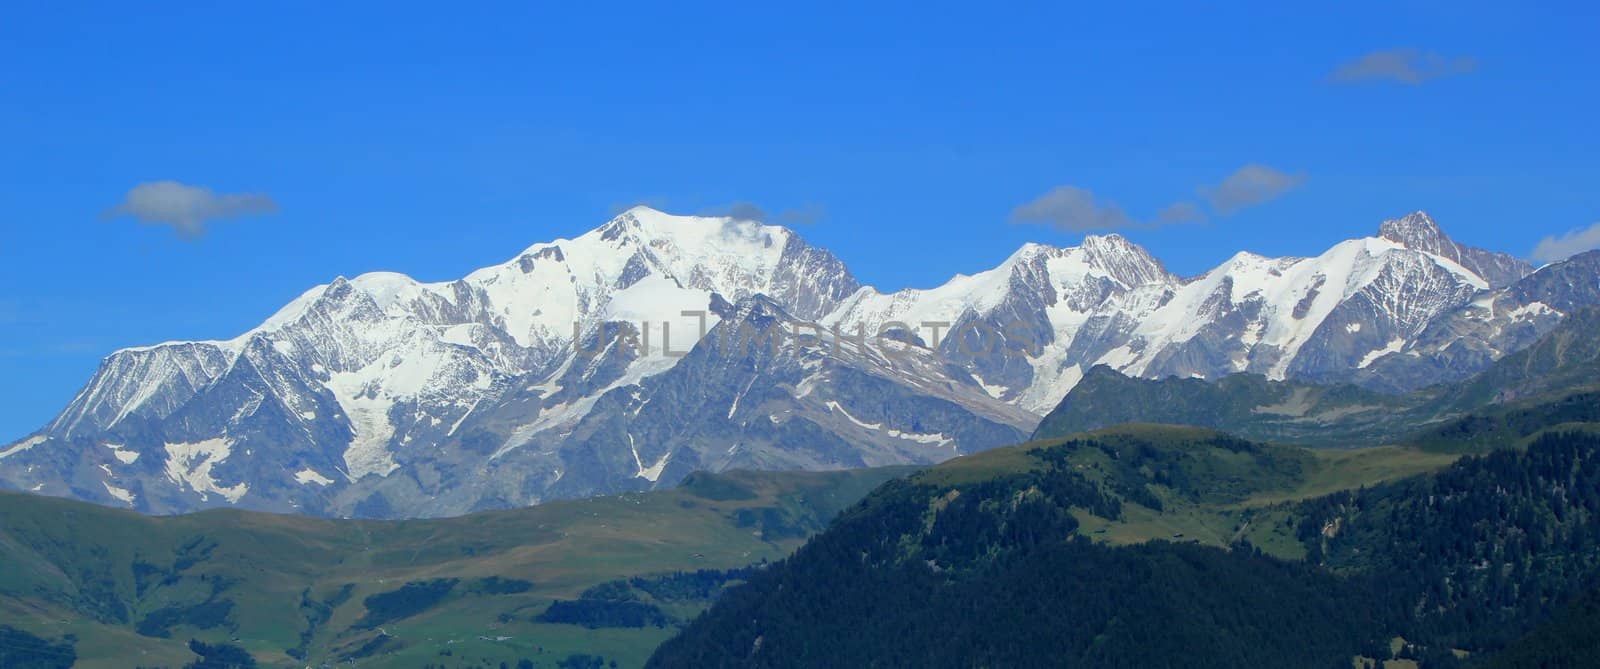 Mont-Blanc mountains by summer, France by Elenaphotos21